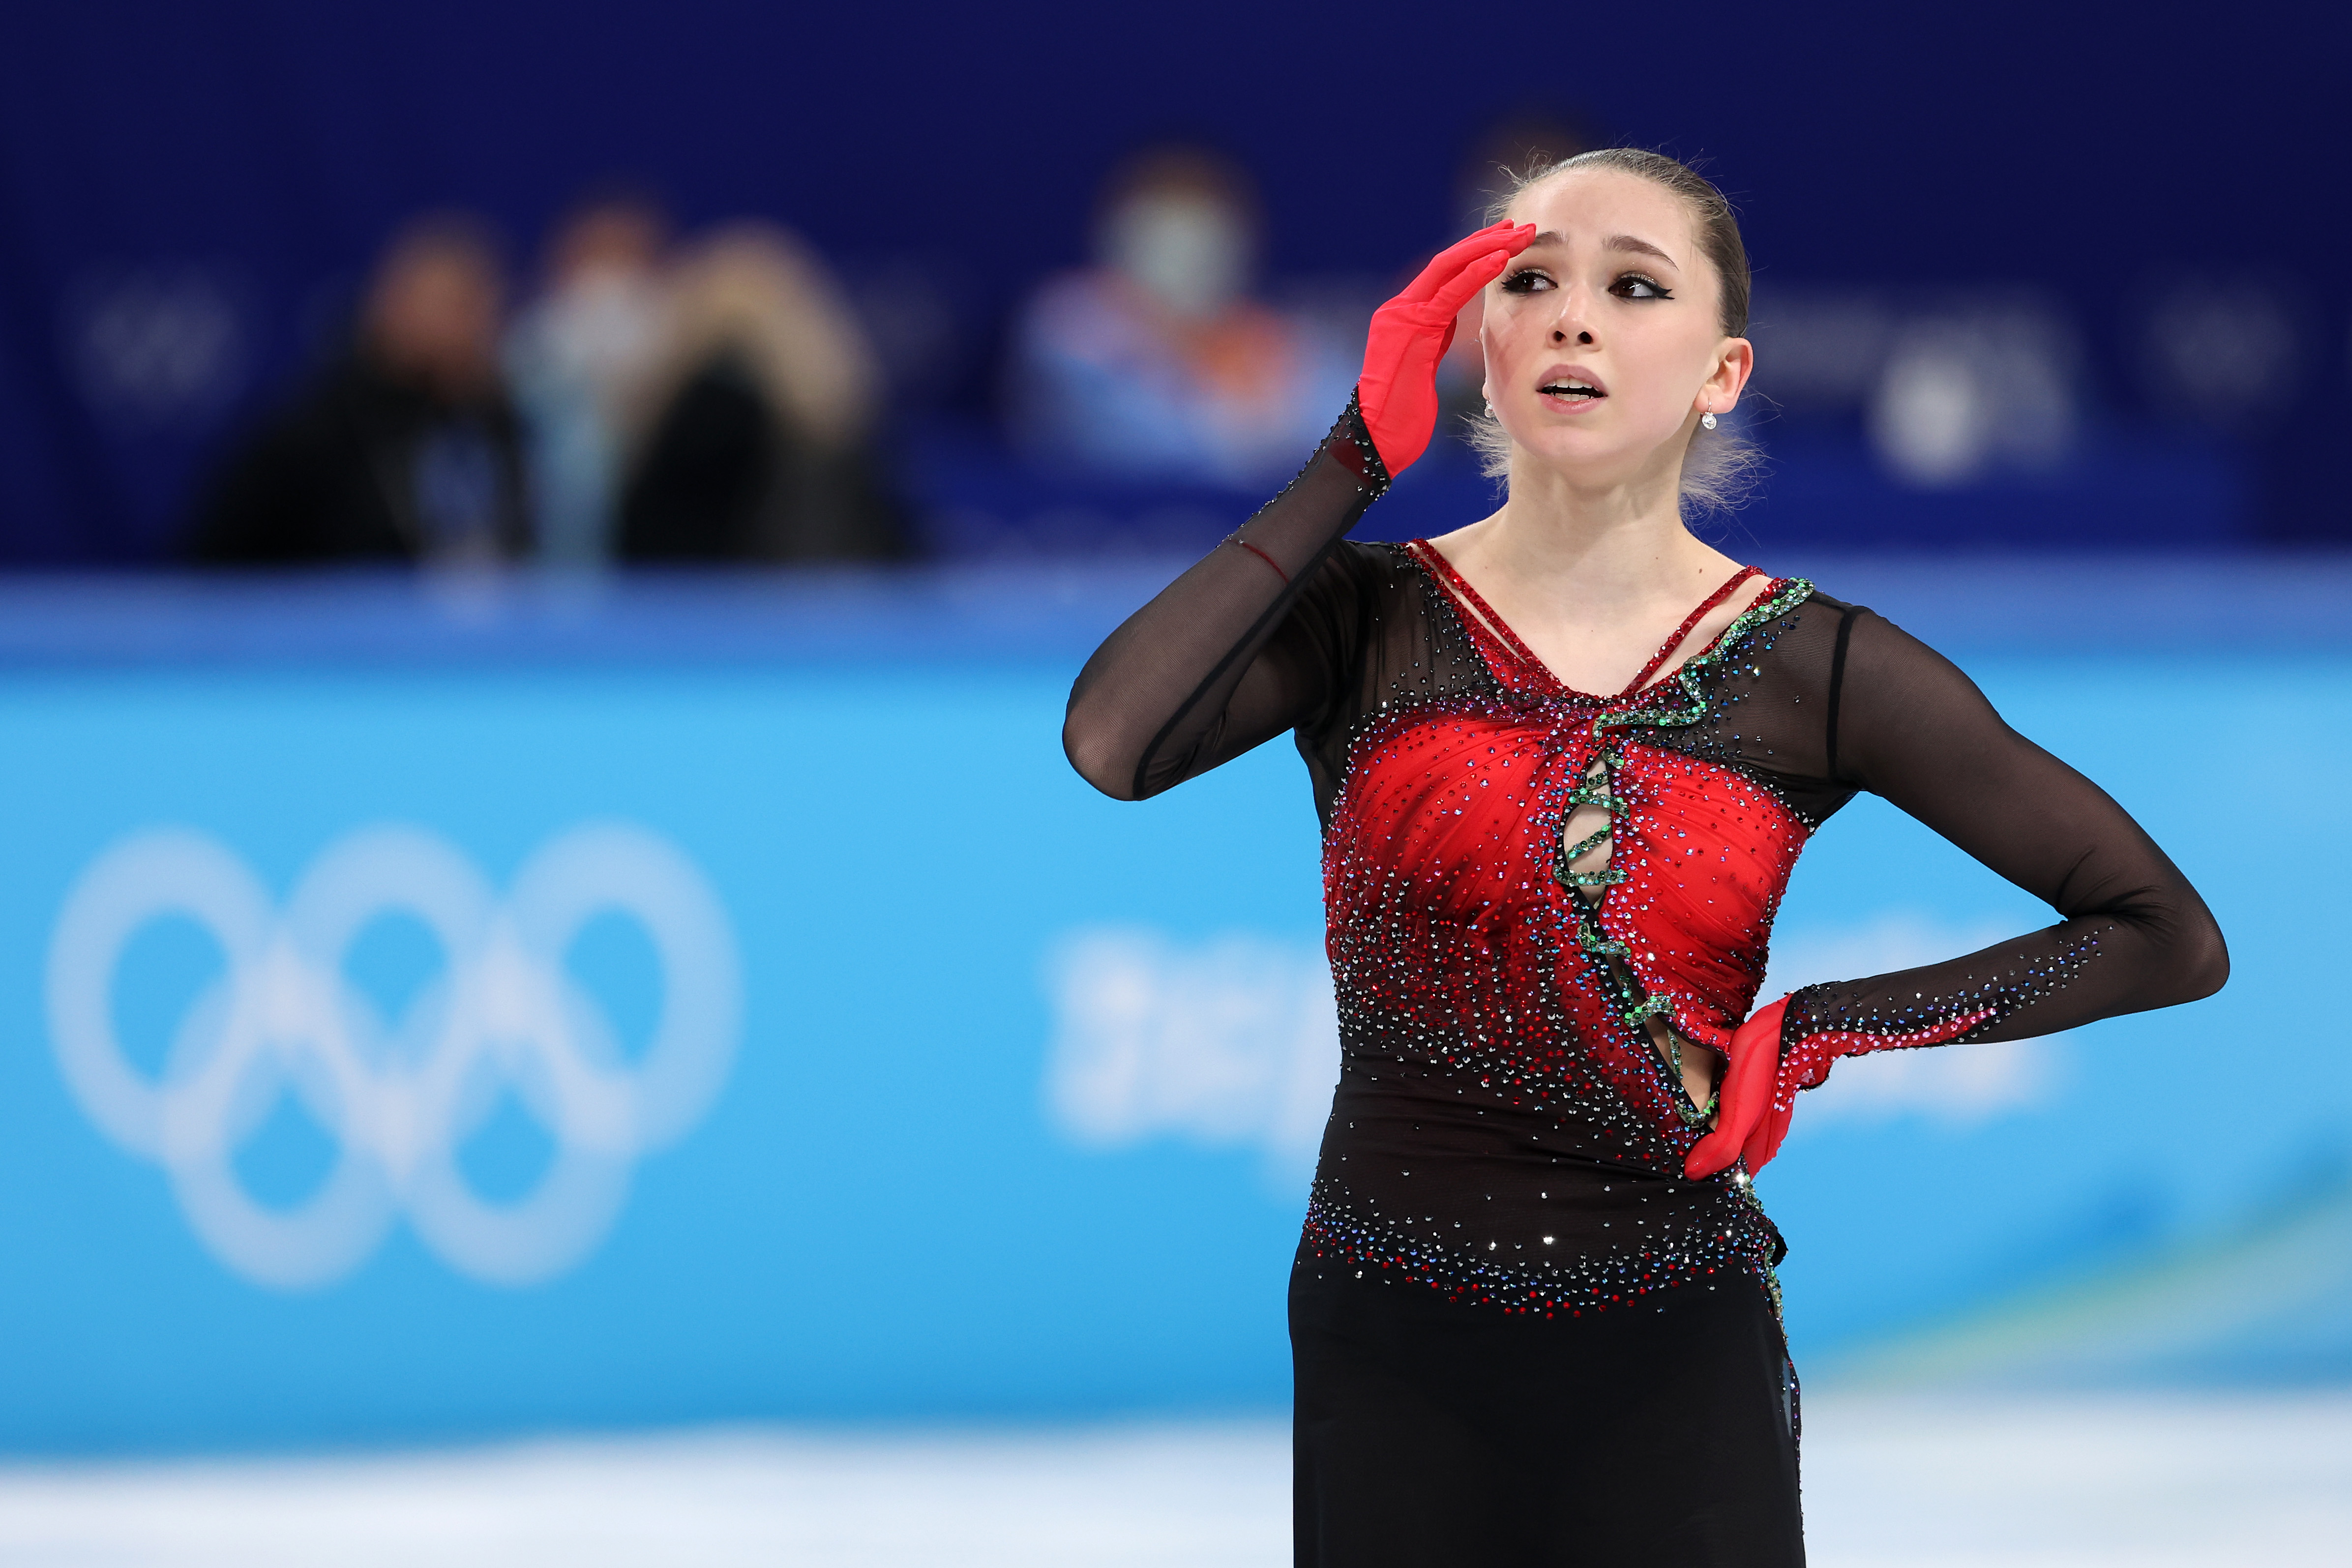 How to Watch Kamila Valieva Compete in Olympic Figure Skating